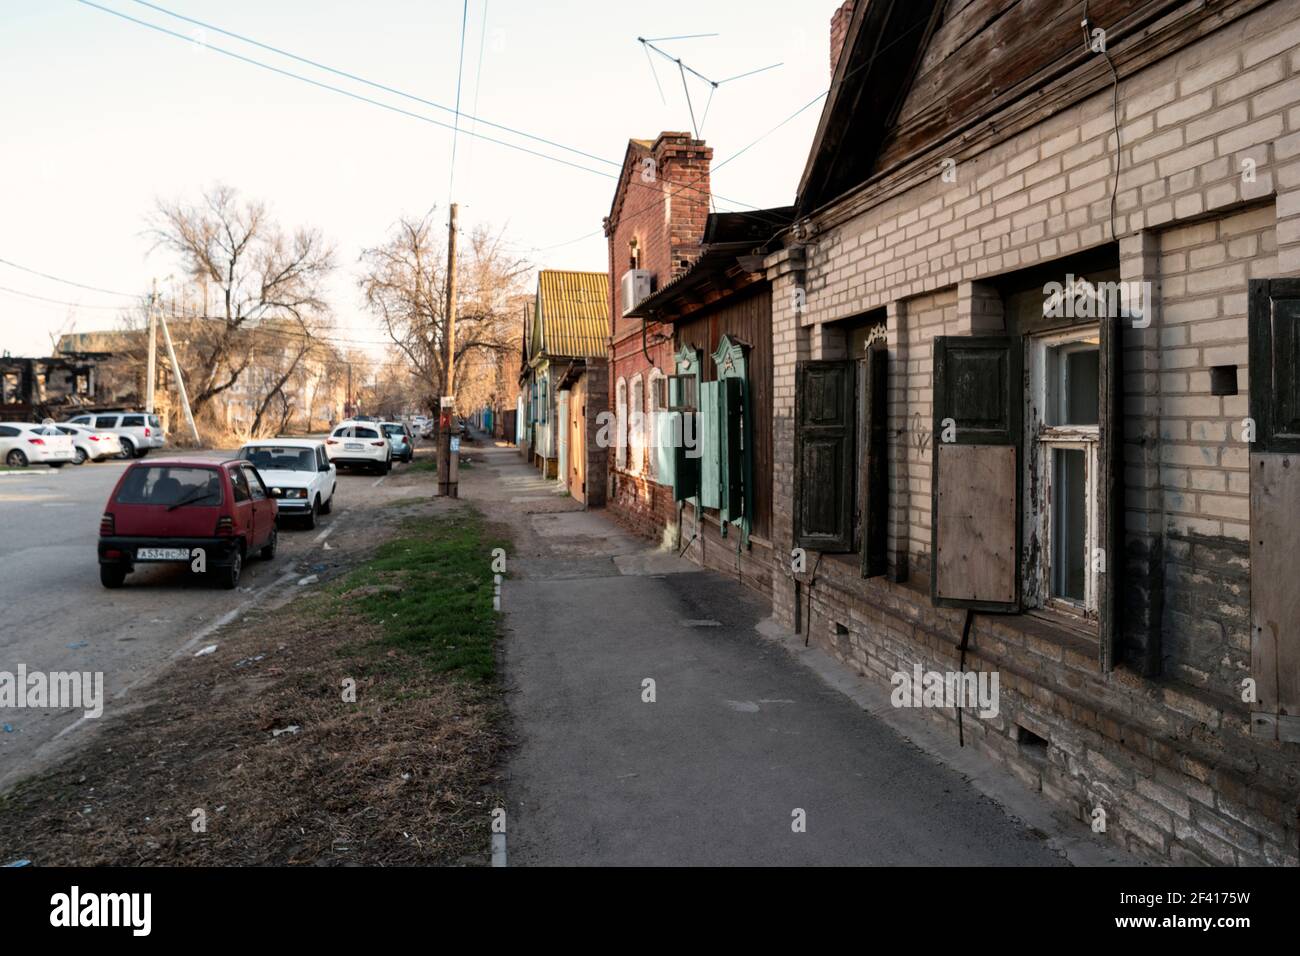 Astrakhan, Russia 12 of April 2018: In The Street Of Astrakhan In Sunny Spring Day With Expensive Cars Parked About Old Slum Houses. Astrakhan, Russia 12 of April 2018: In The Street Of Astrakhan In Sunny Spring Day With Cars Parked About Old Houses Stock Photo